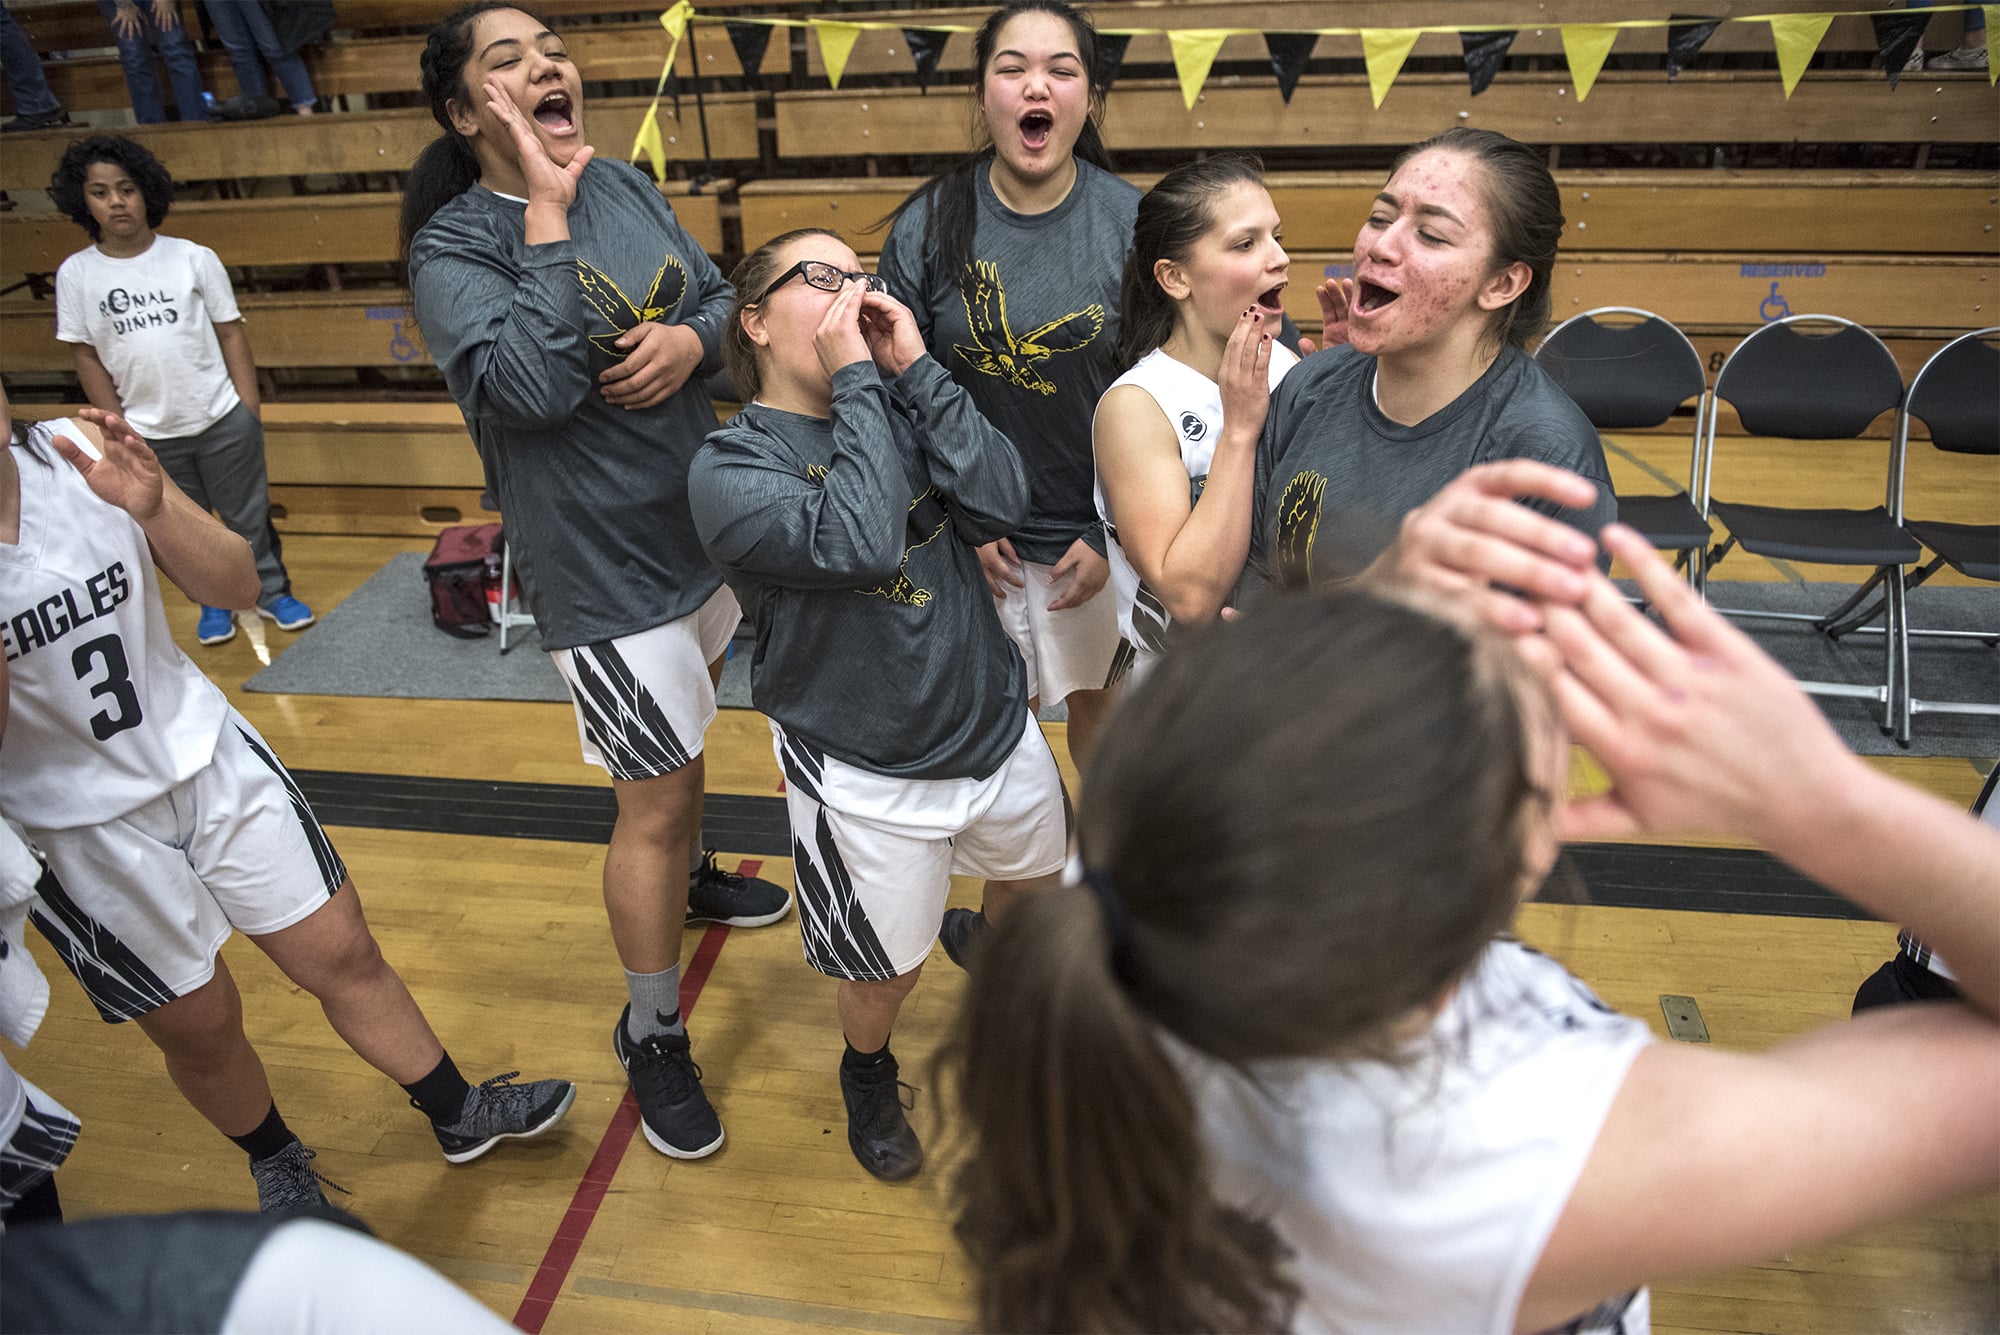 The Hudson's Bay Eagles celebrate their victory over Capital at Hudson's Bay High School on Thursday night, Feb. 7, 2019.